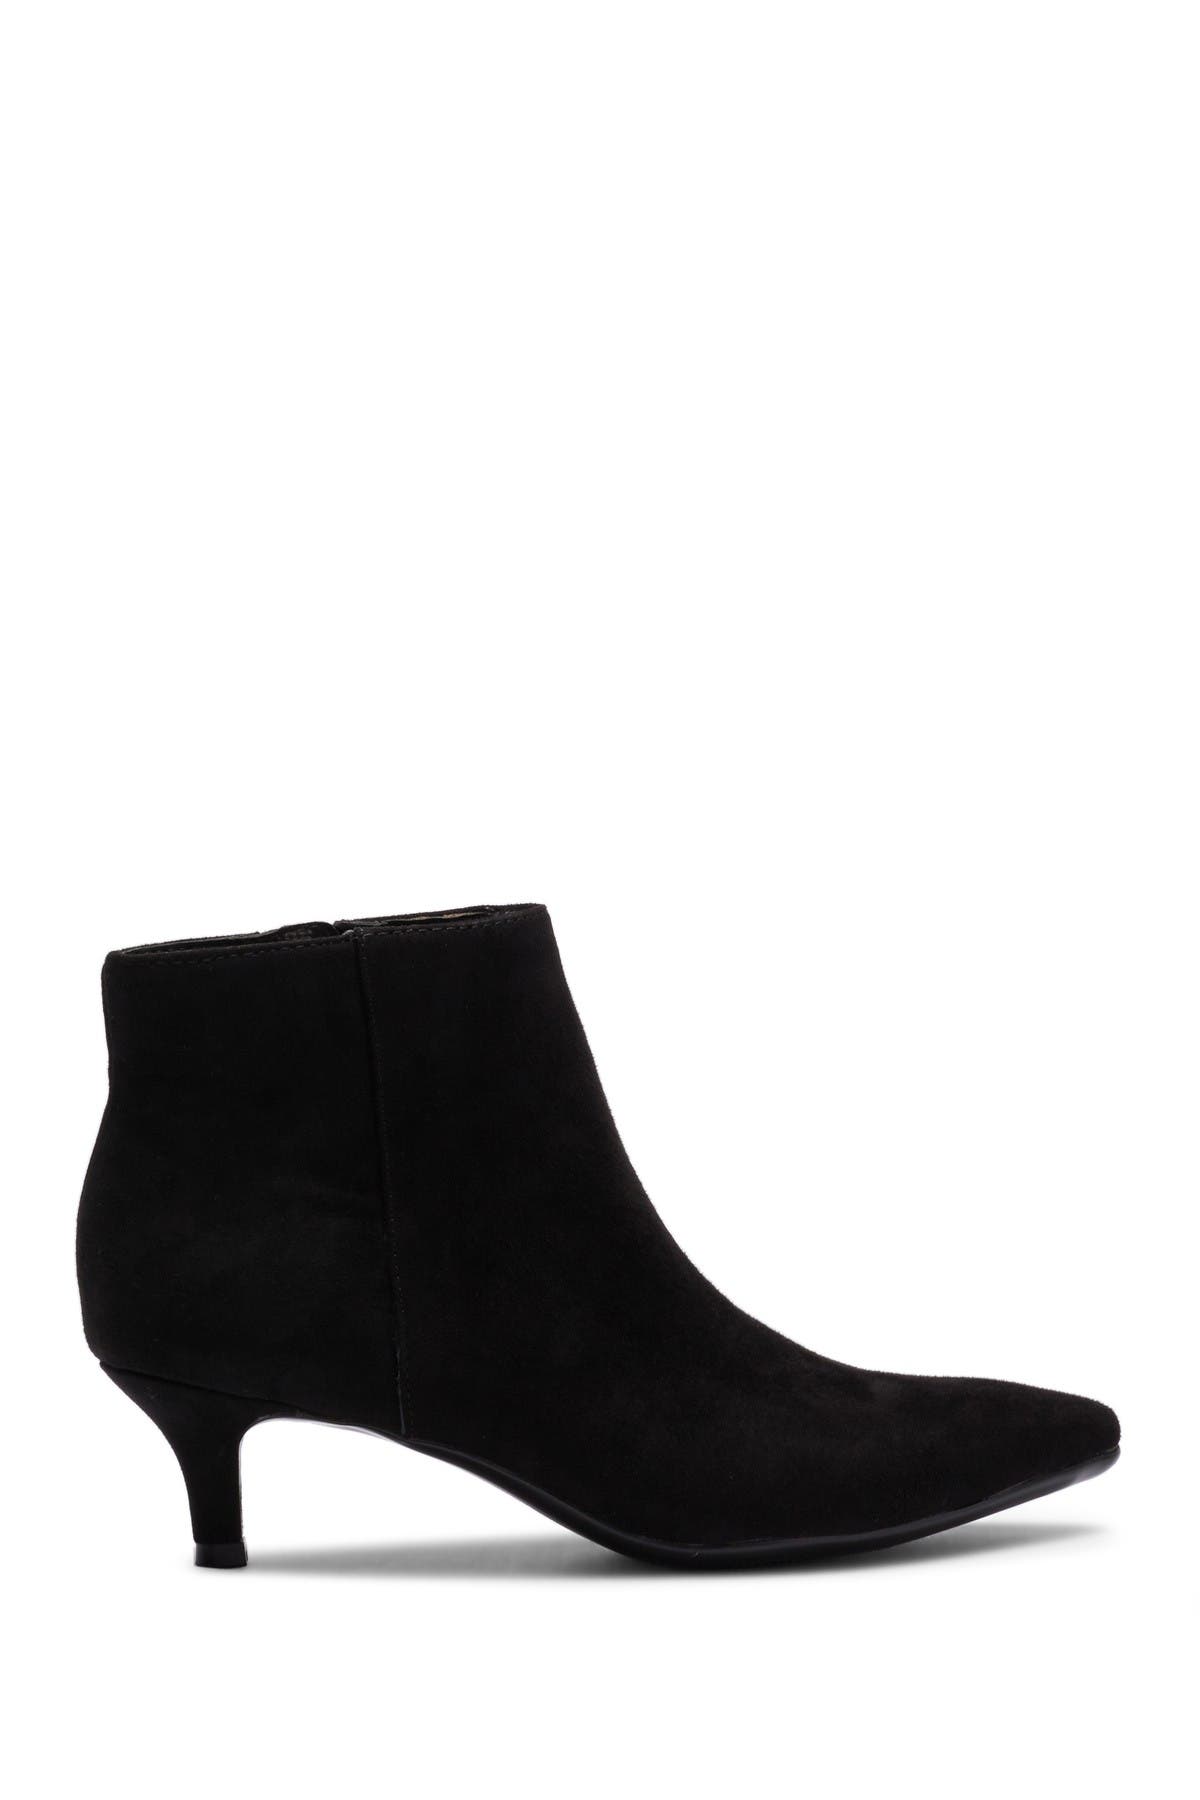 naturalizer giselle bootie